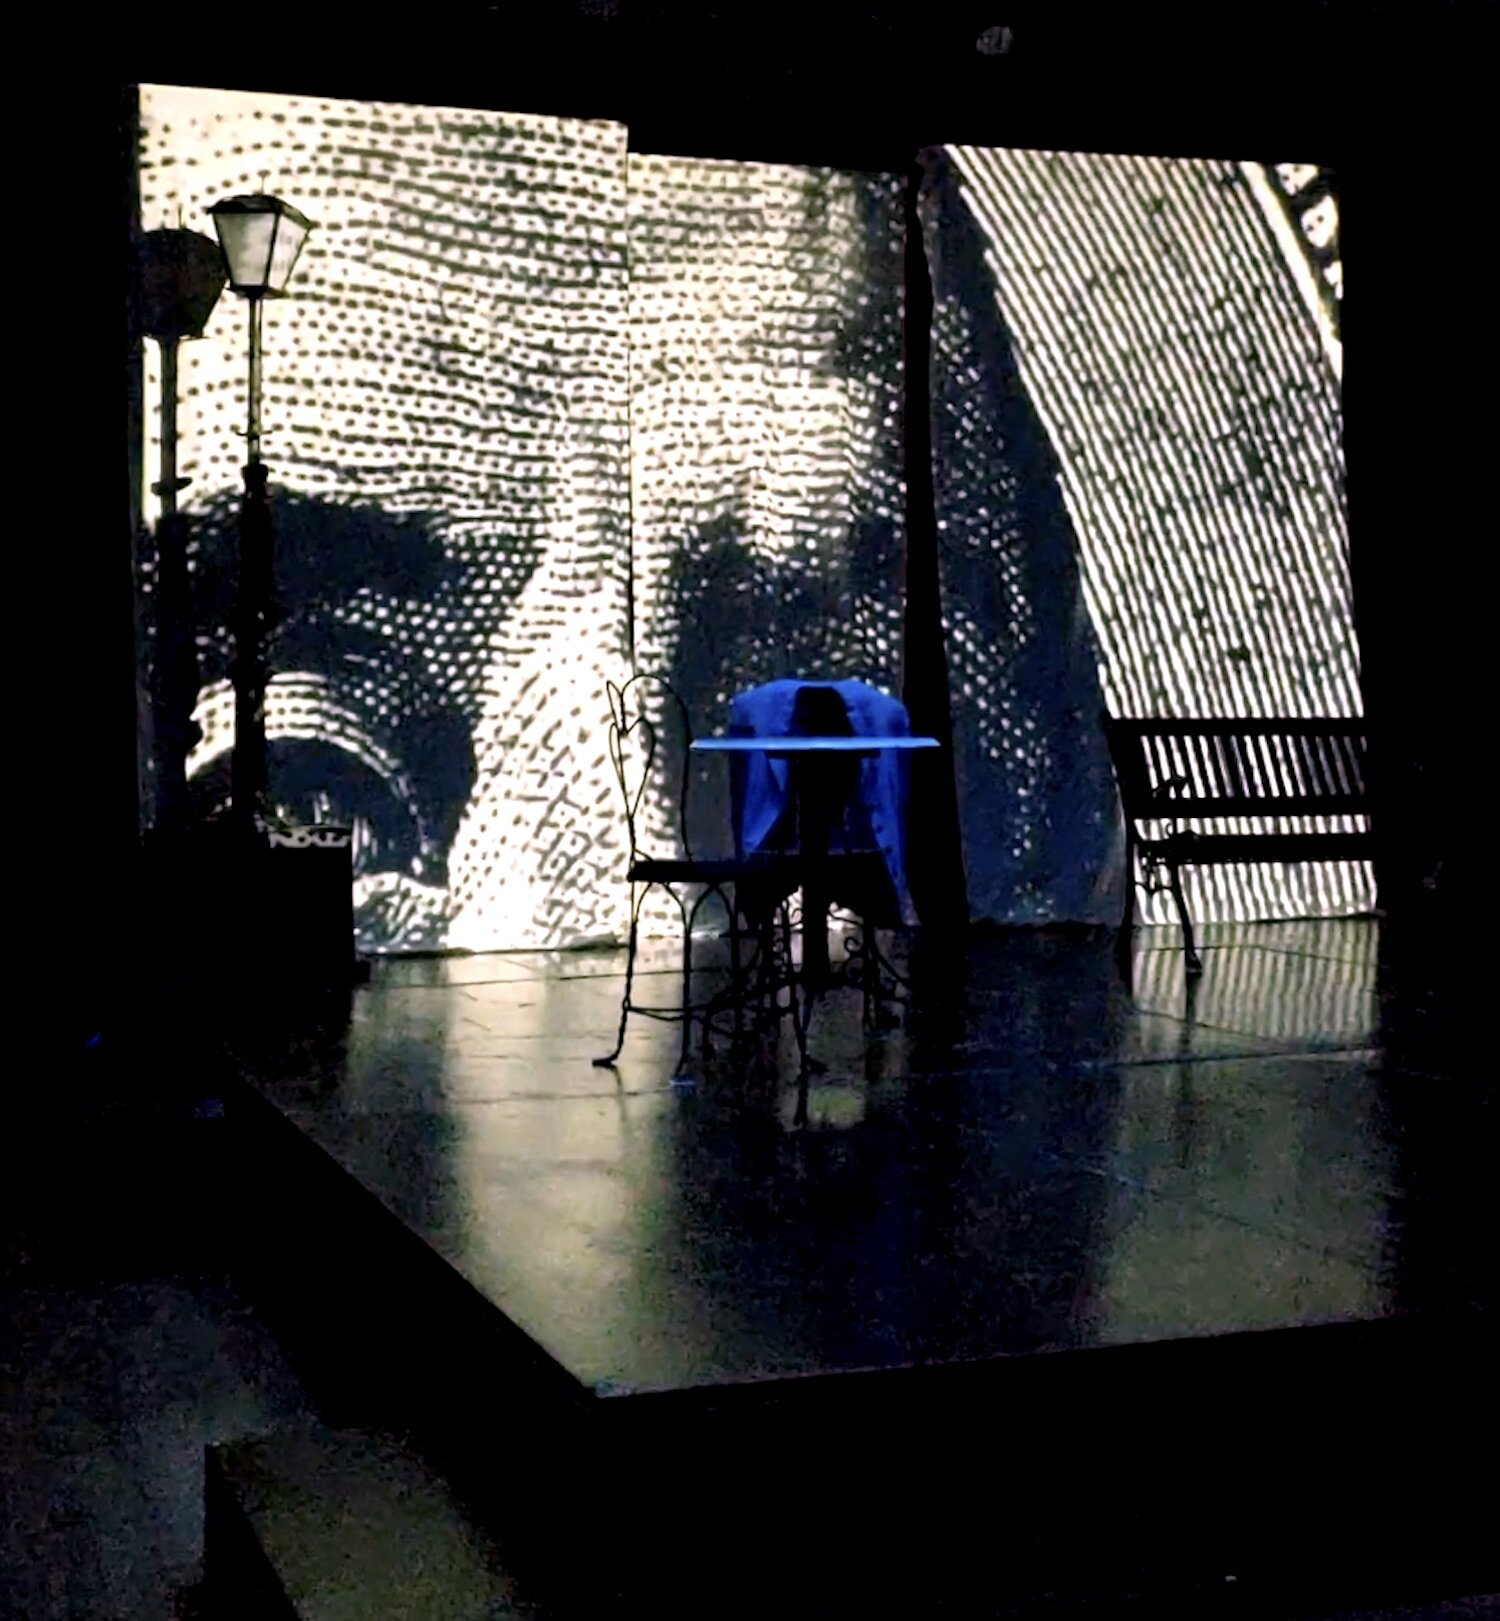 1st show_Seagulls by Caryl Churchill_Projections_SetDesign.jpg